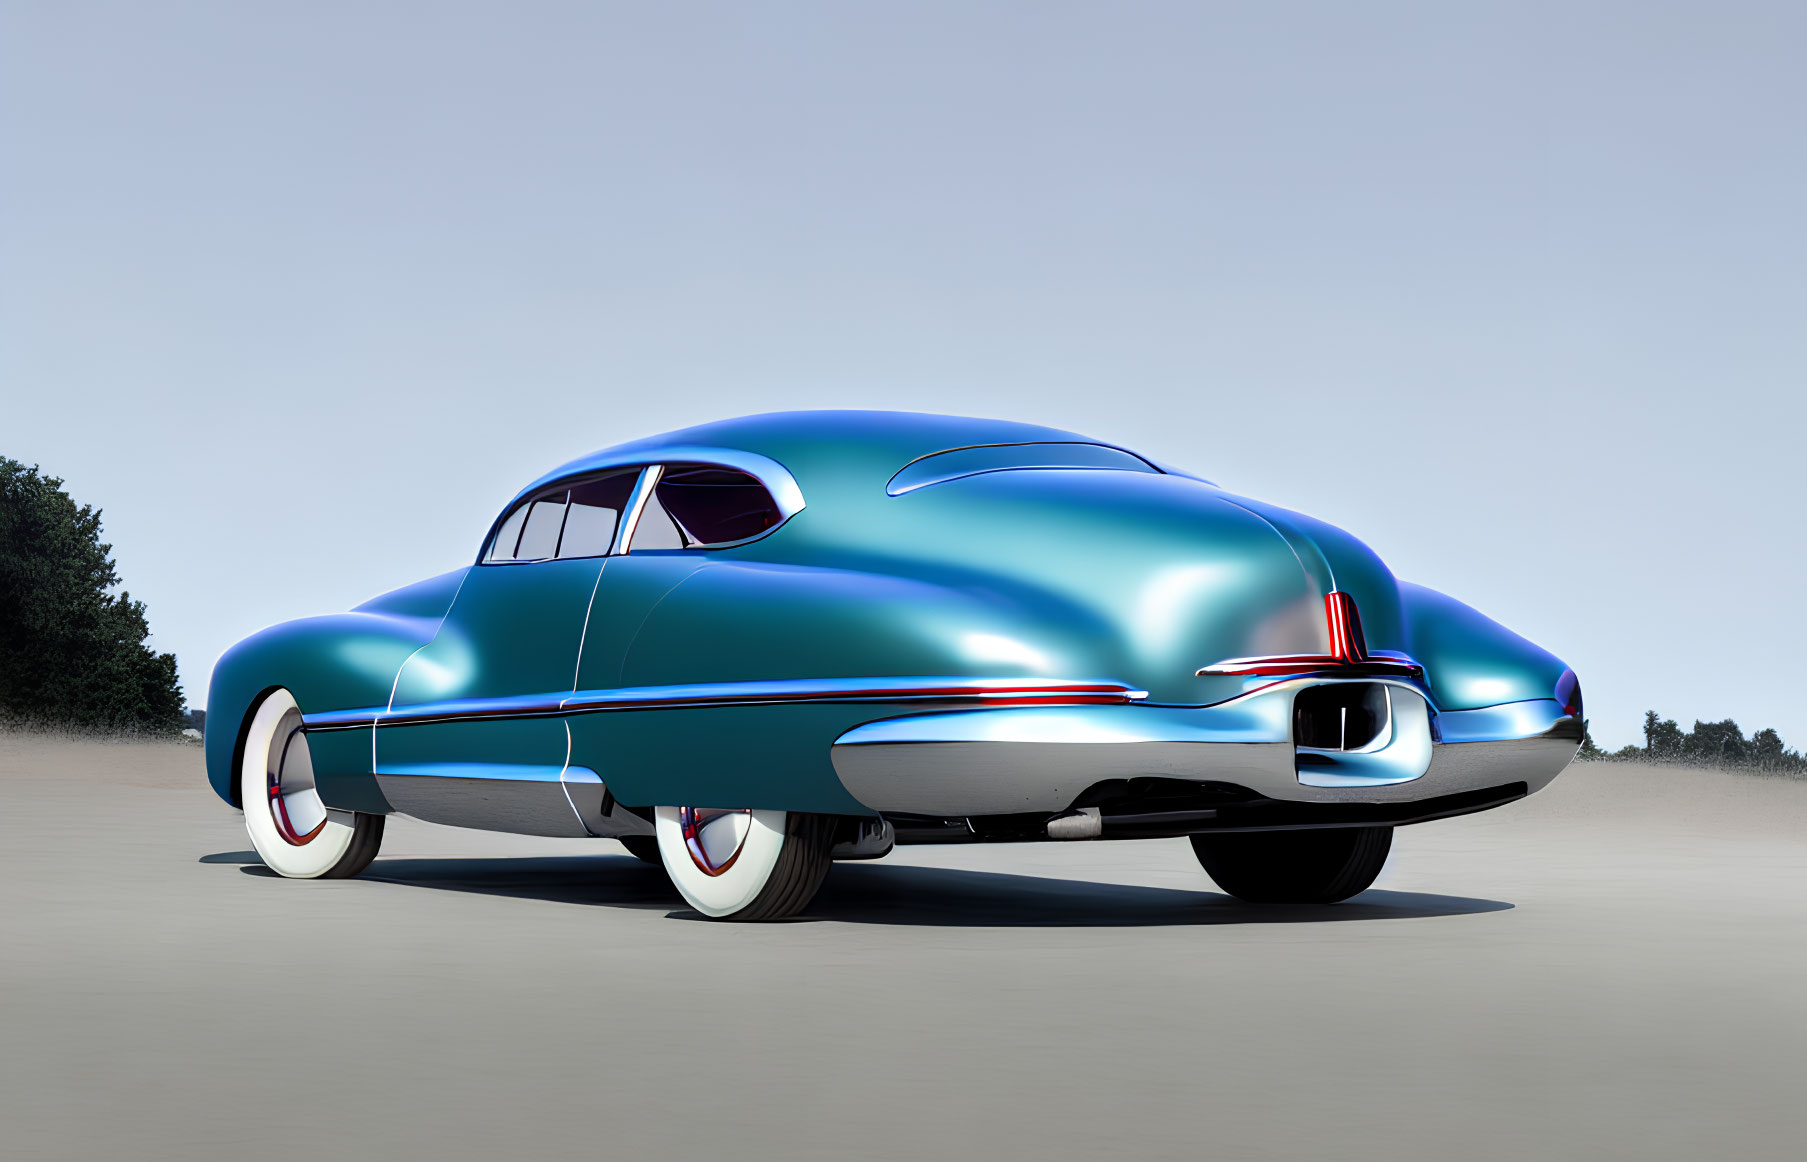 Vintage Blue Car with White-Wall Tires and Futuristic Design